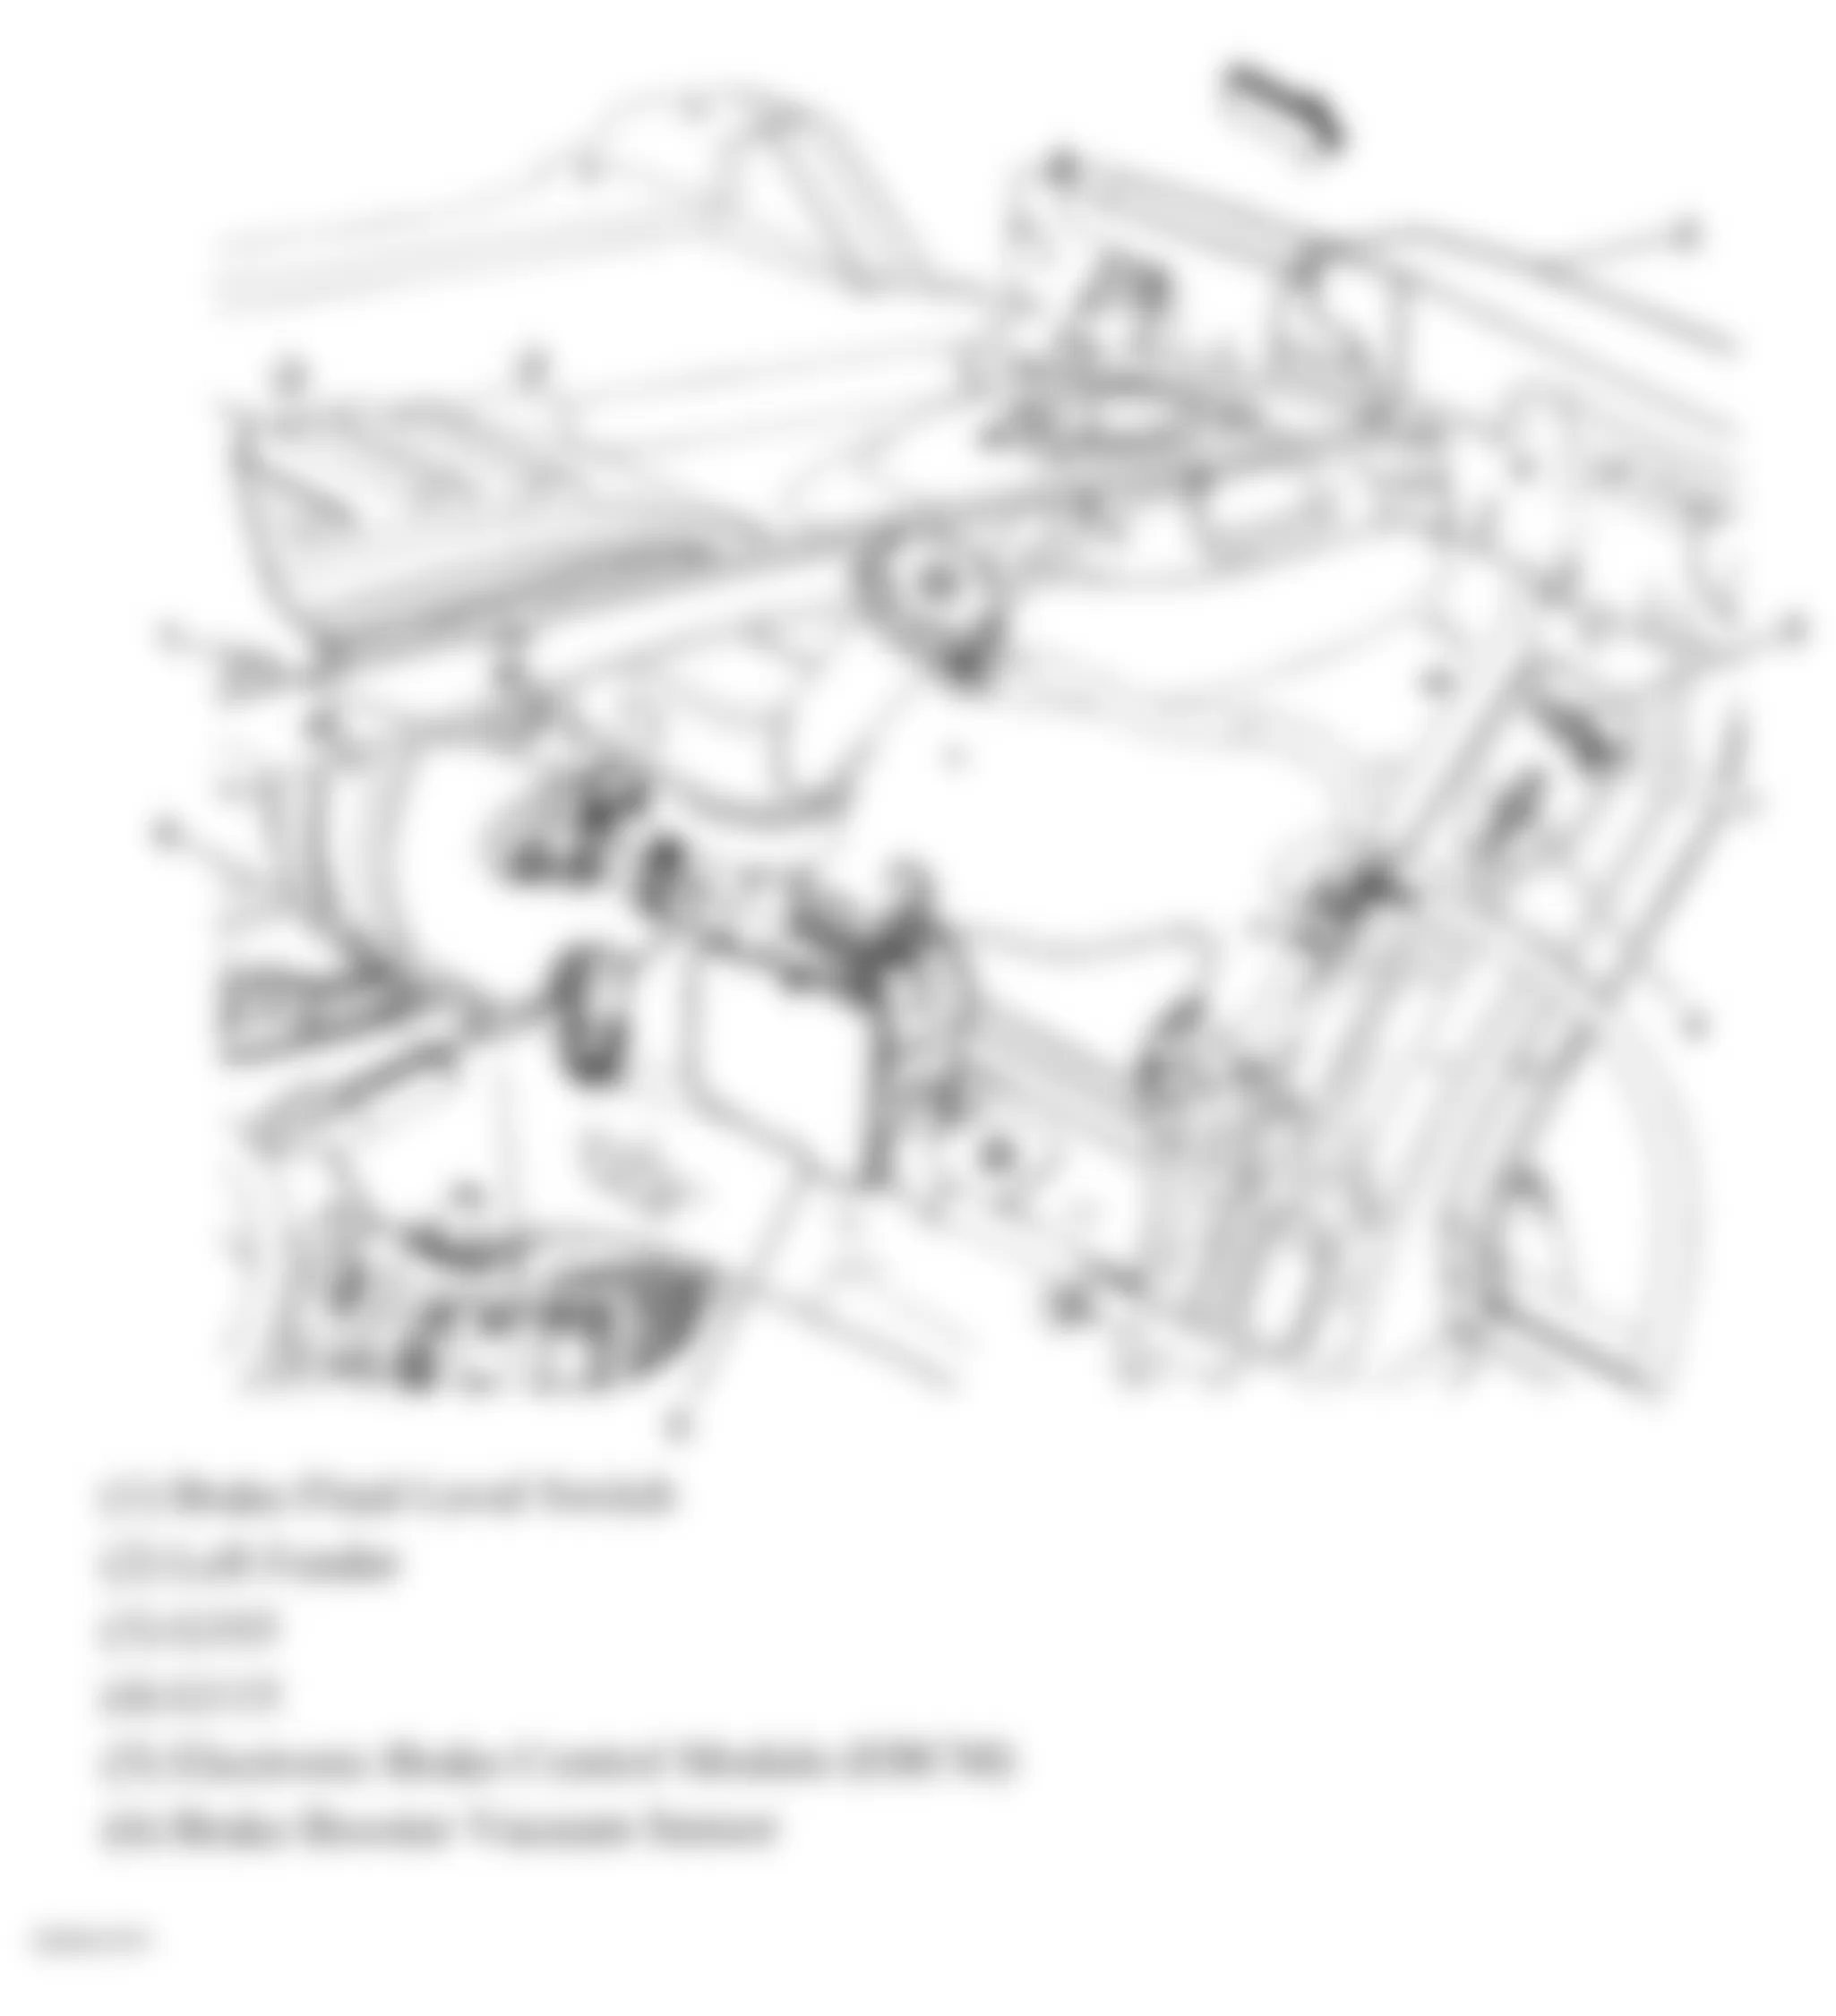 GMC Acadia SLT 2007 - Component Locations -  Left Rear Of Engine Compartment